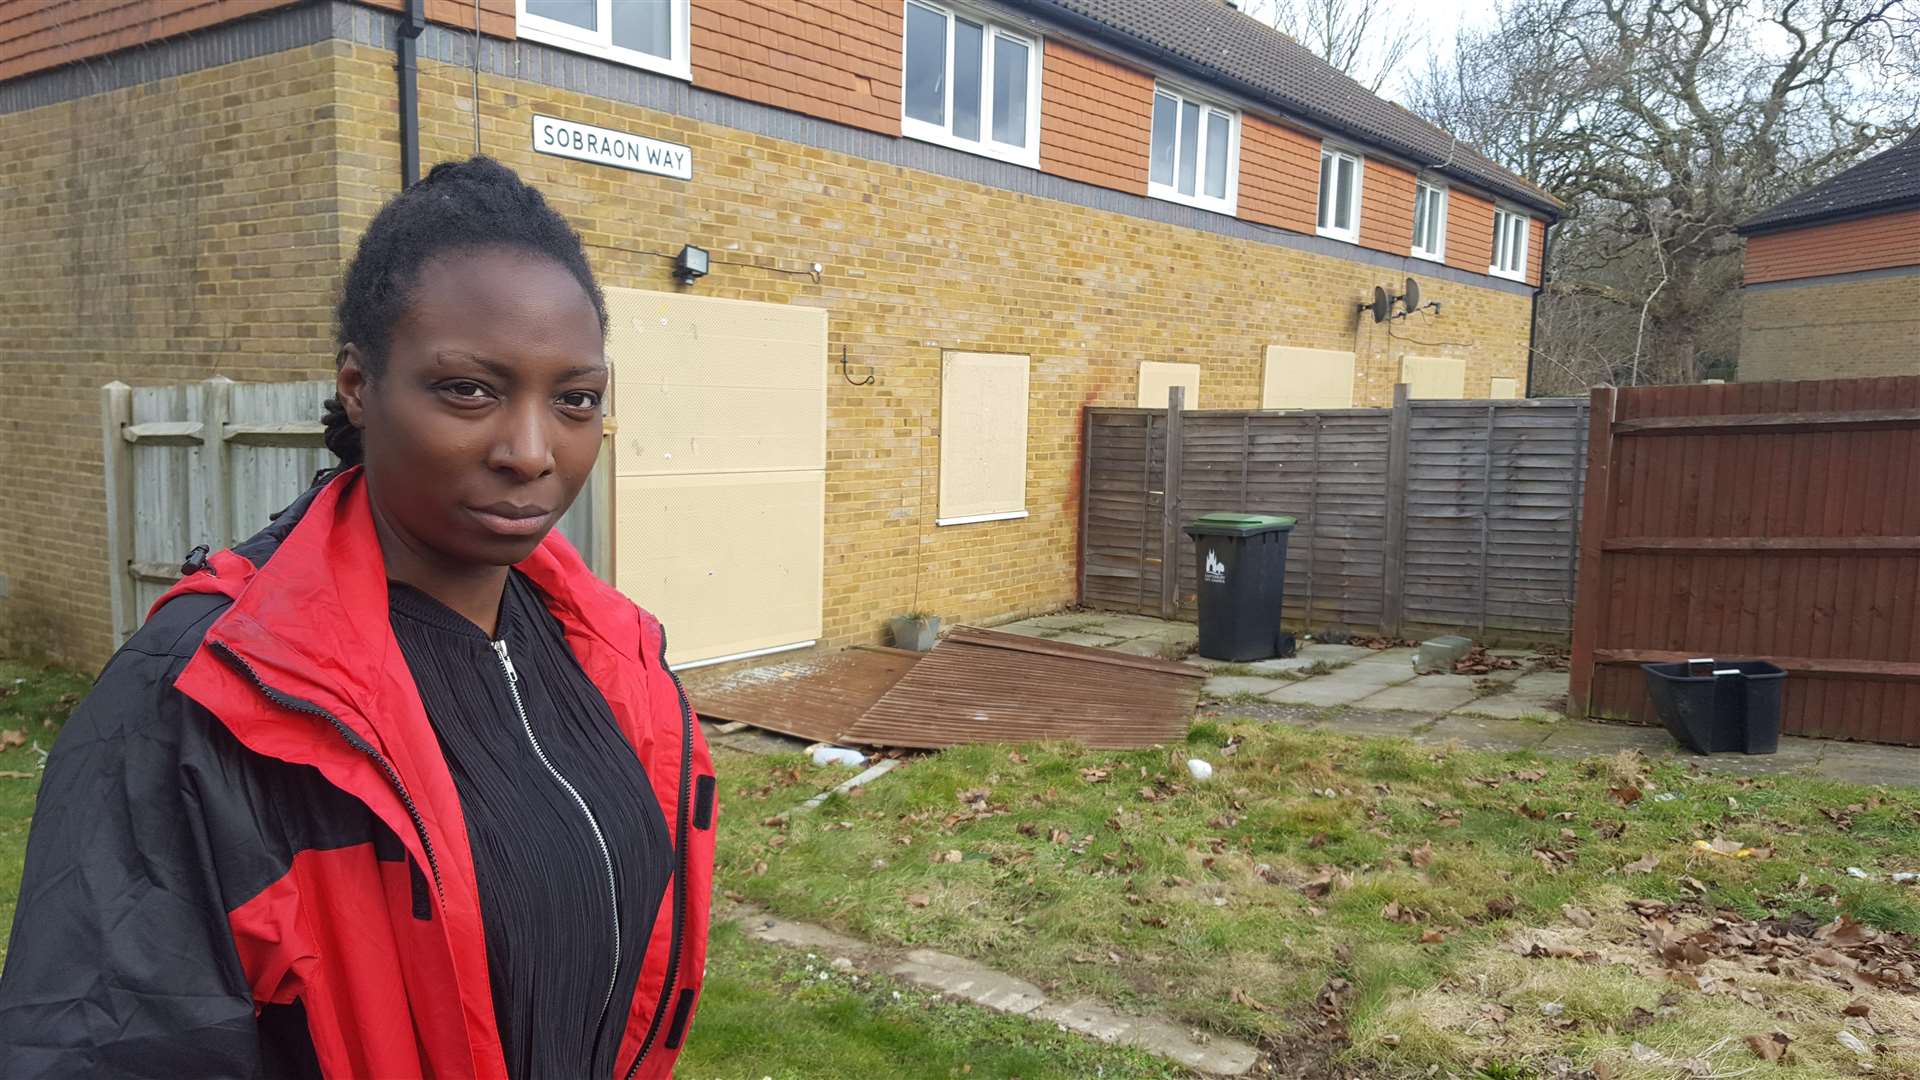 Natalie Mbbunga outside the boarded up former army homes in Sobraon Way, Canterbury